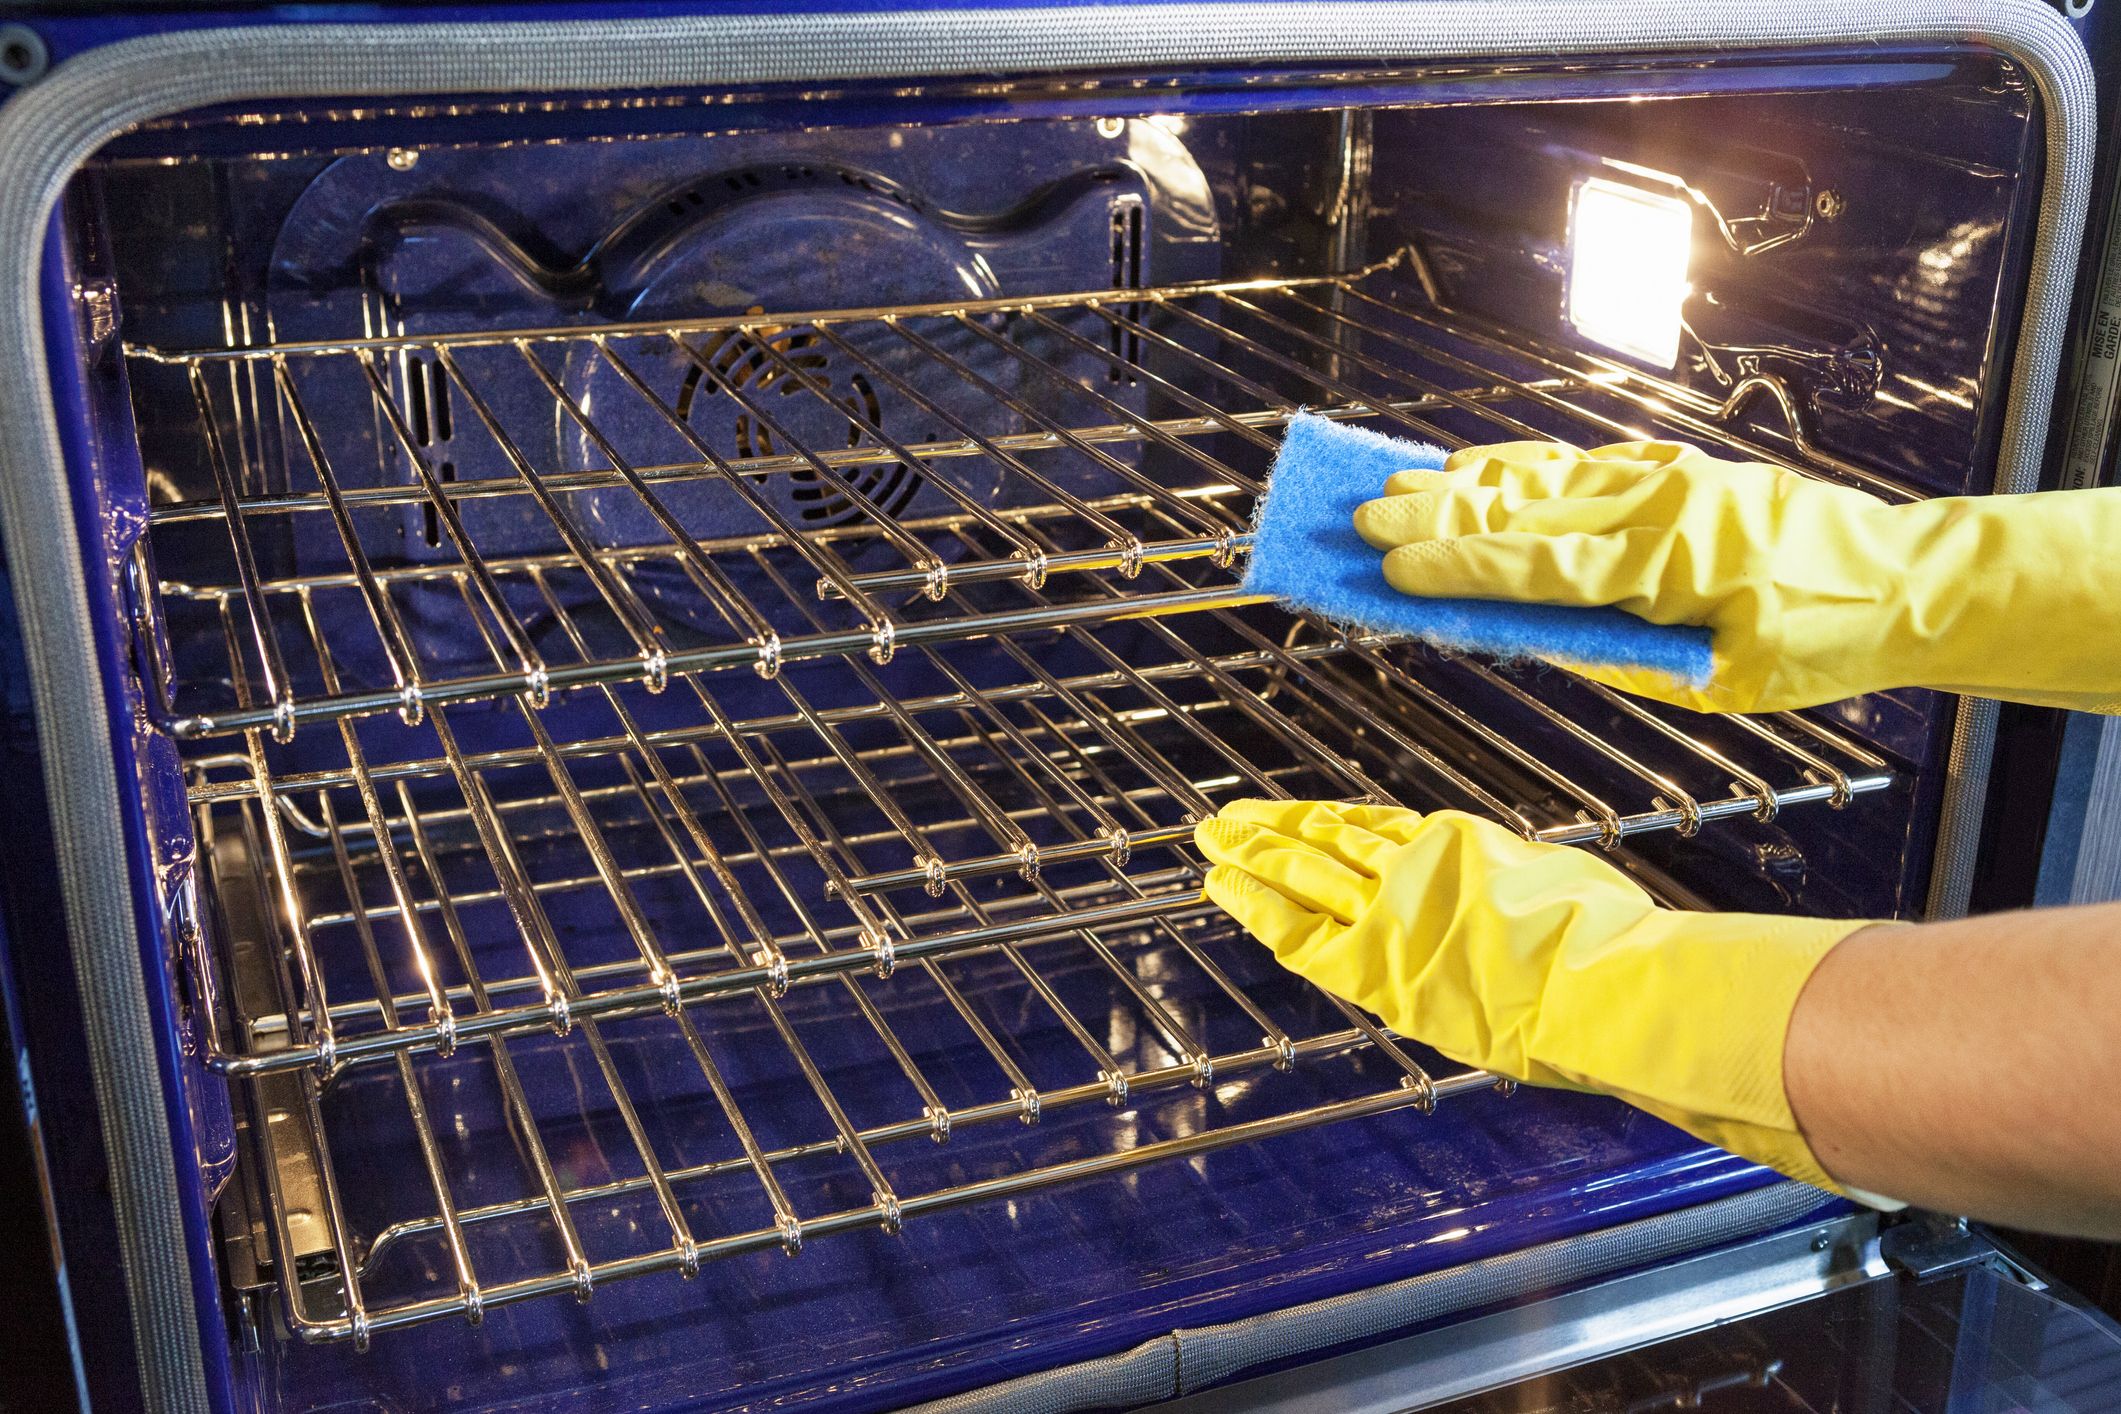 How to Clean the Oven with the Heating Element on the Bottom
